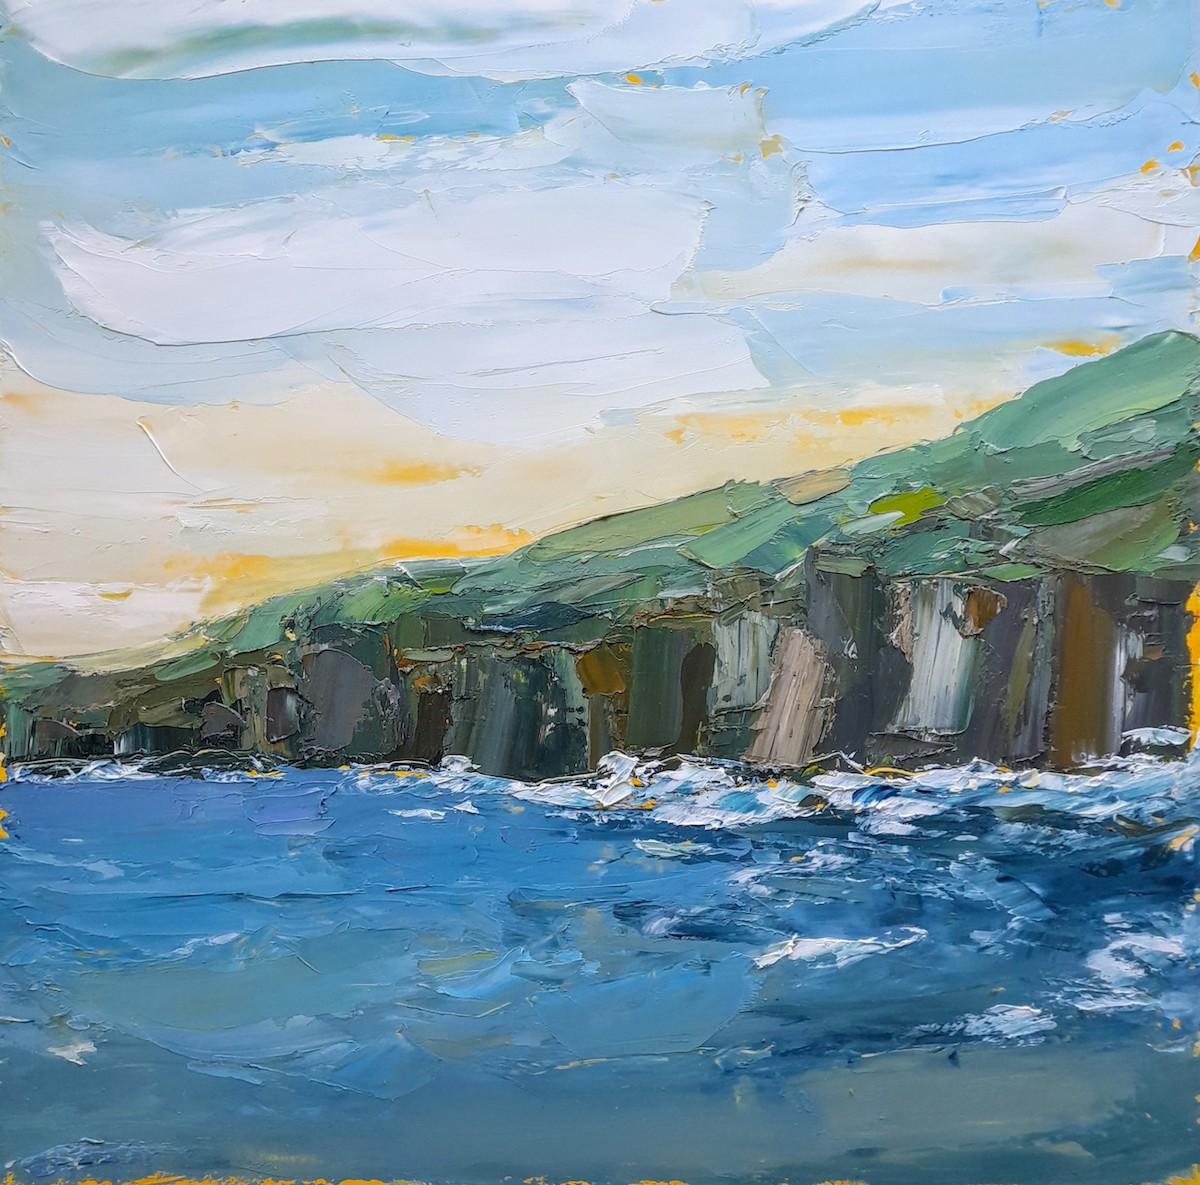 Georgie Dowling  Figurative Painting - Across the Bay - Cornwall by Georgie Dowling, Contemporary seascape painting